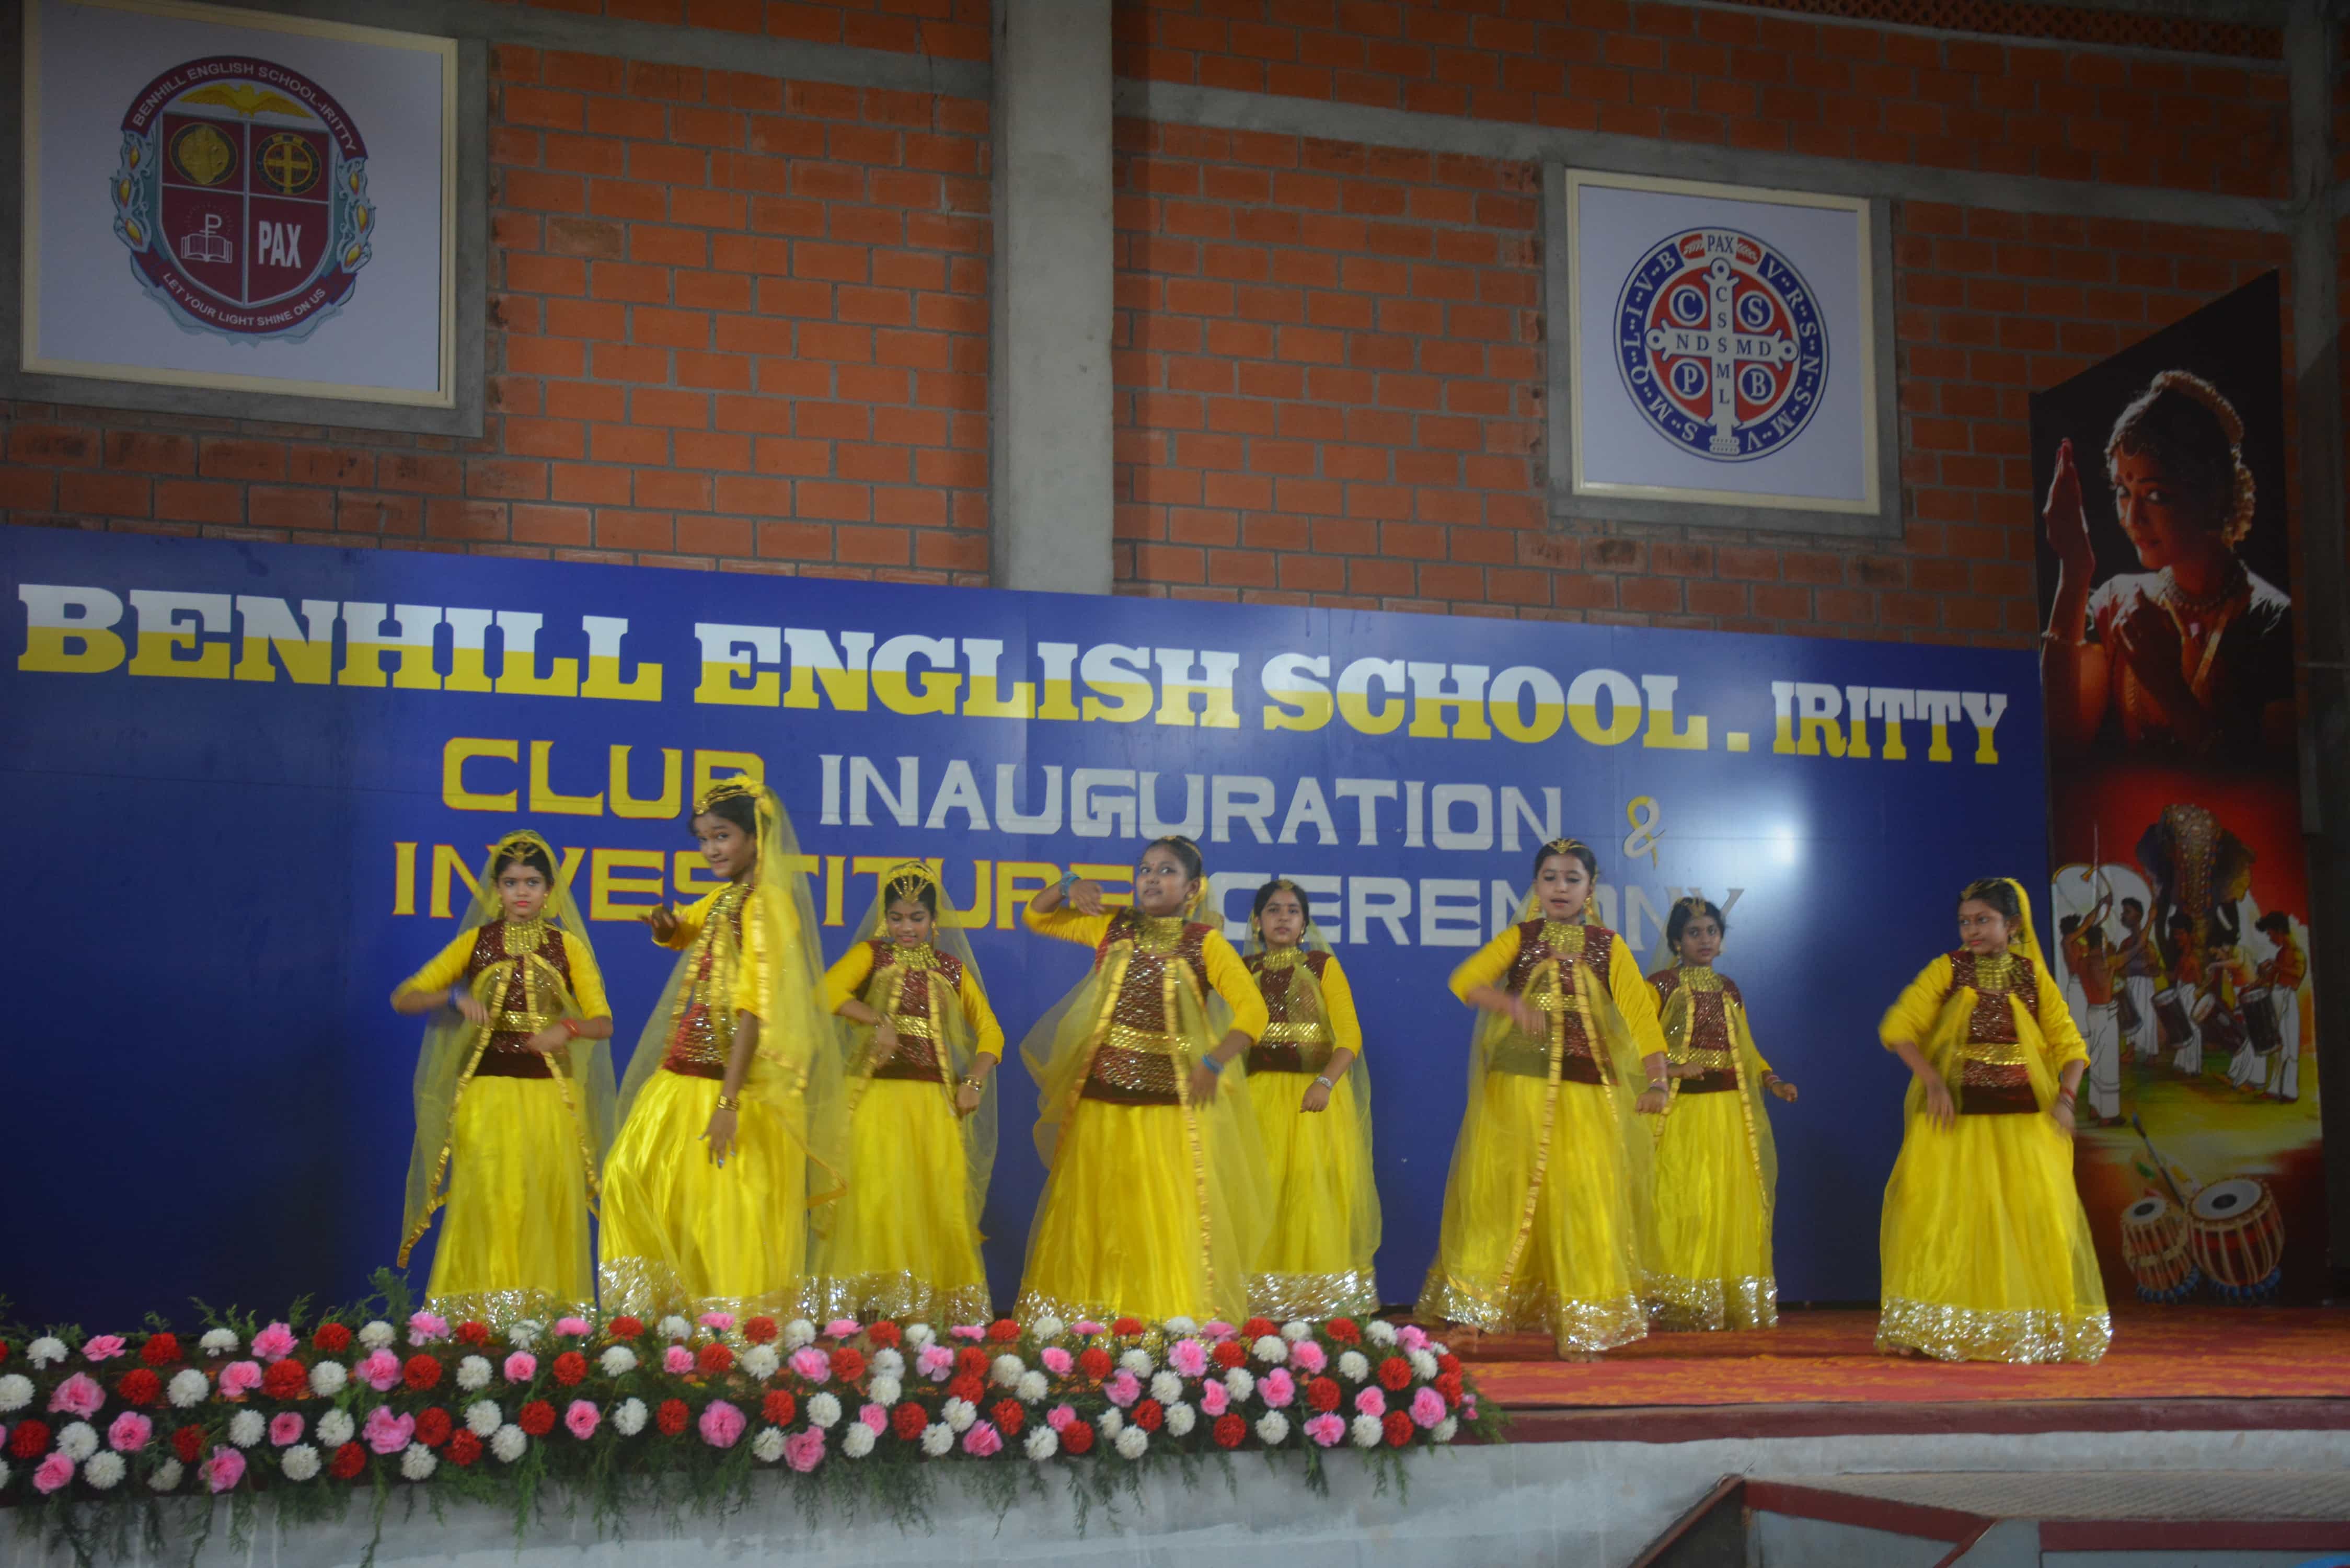 club inauguration and investiture ceremony at benhill school iritty 2022